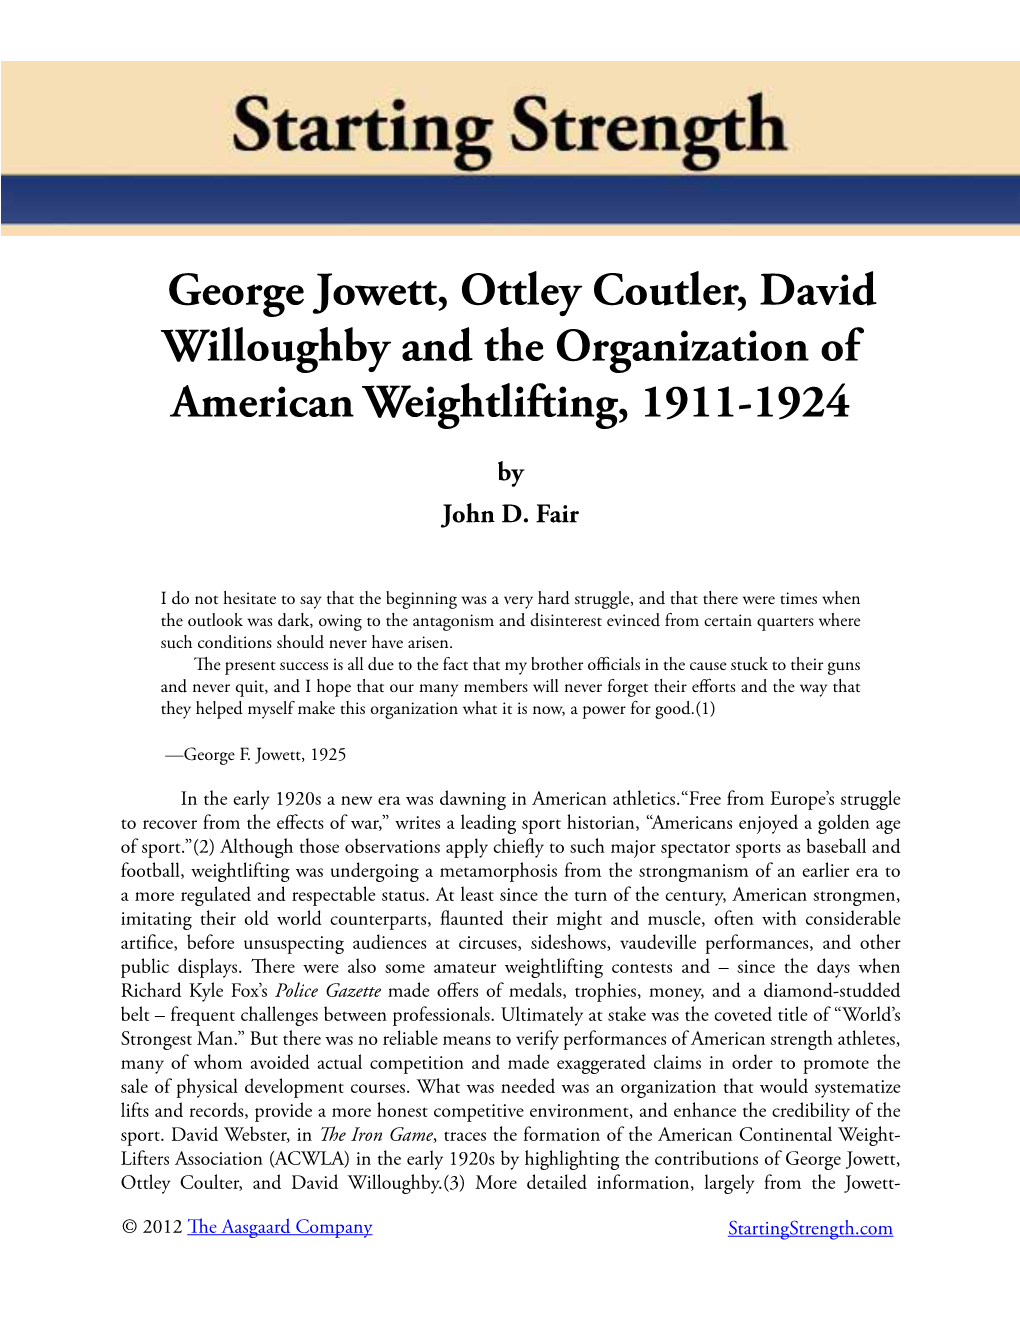 George Jowett, Ottley Coutler, David Willoughby and the Organization of American Weightlifting, 1911-1924